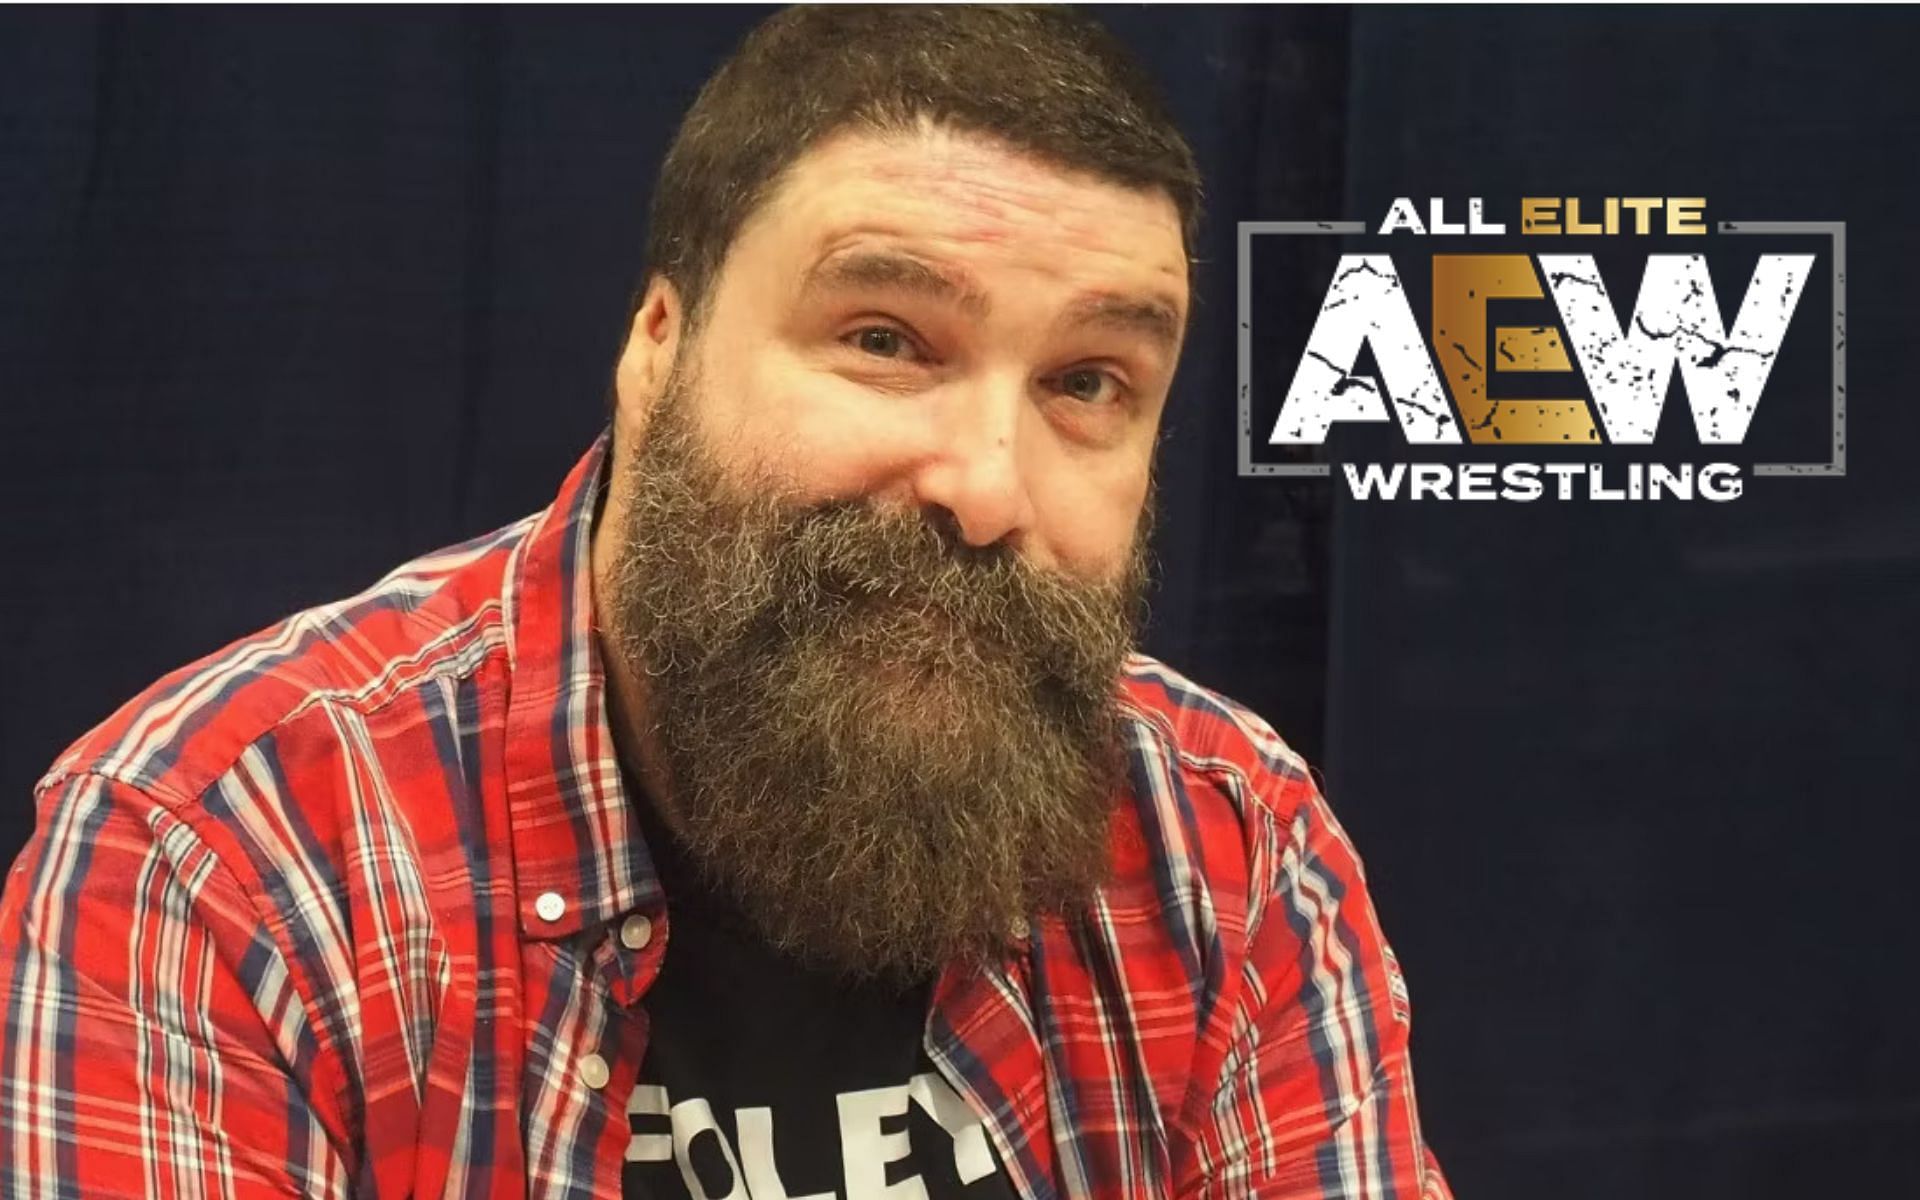 Mick Foley is a 3-time WWE Champion